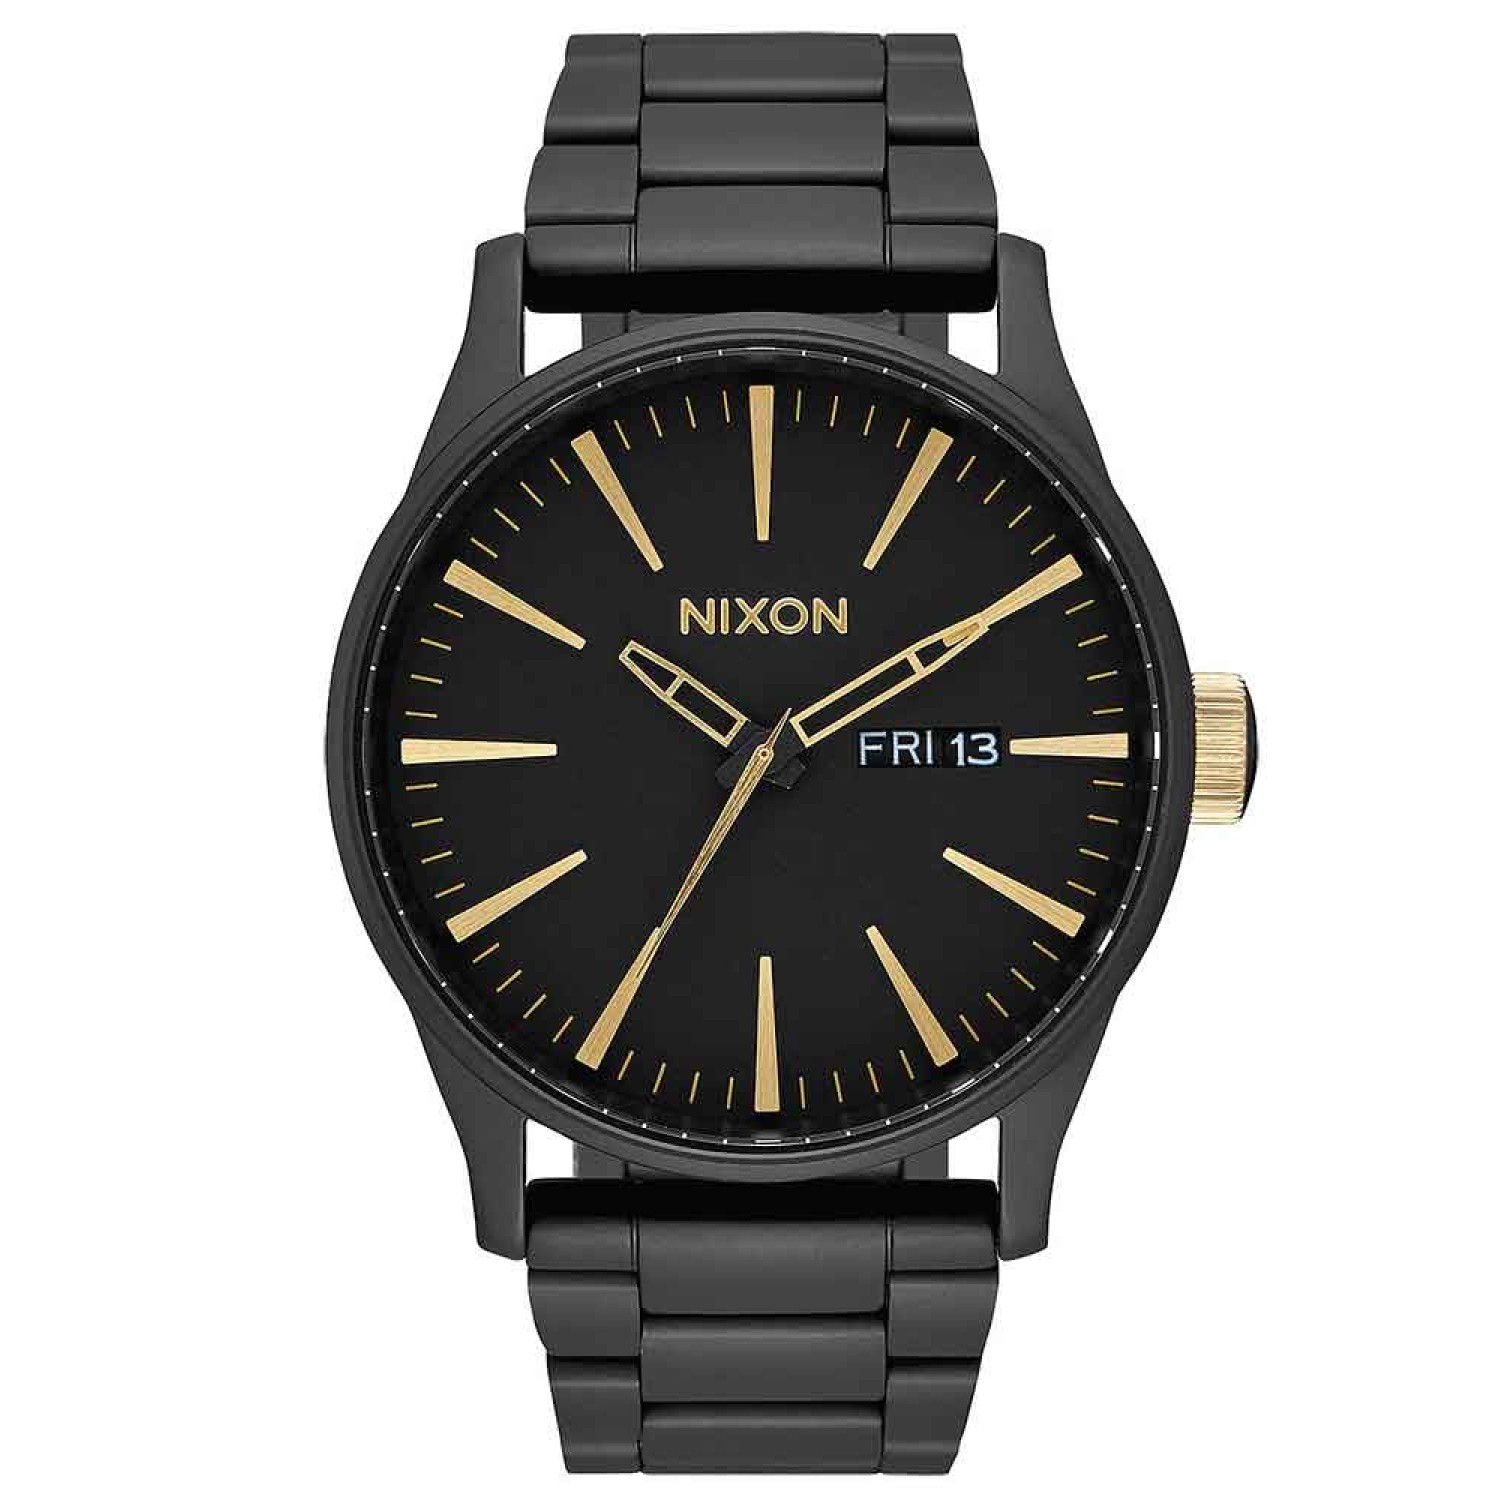 A3561041 NIXON Mens SENTRY Black Watch. A timeless 42 mm design with the modern Nixon twist of faceted applied hour indices2 Year  Guarantee 3 Months No Payments and Interest for Q Card holders This watch is pressure rated at 100 metres or 10bar. This mak